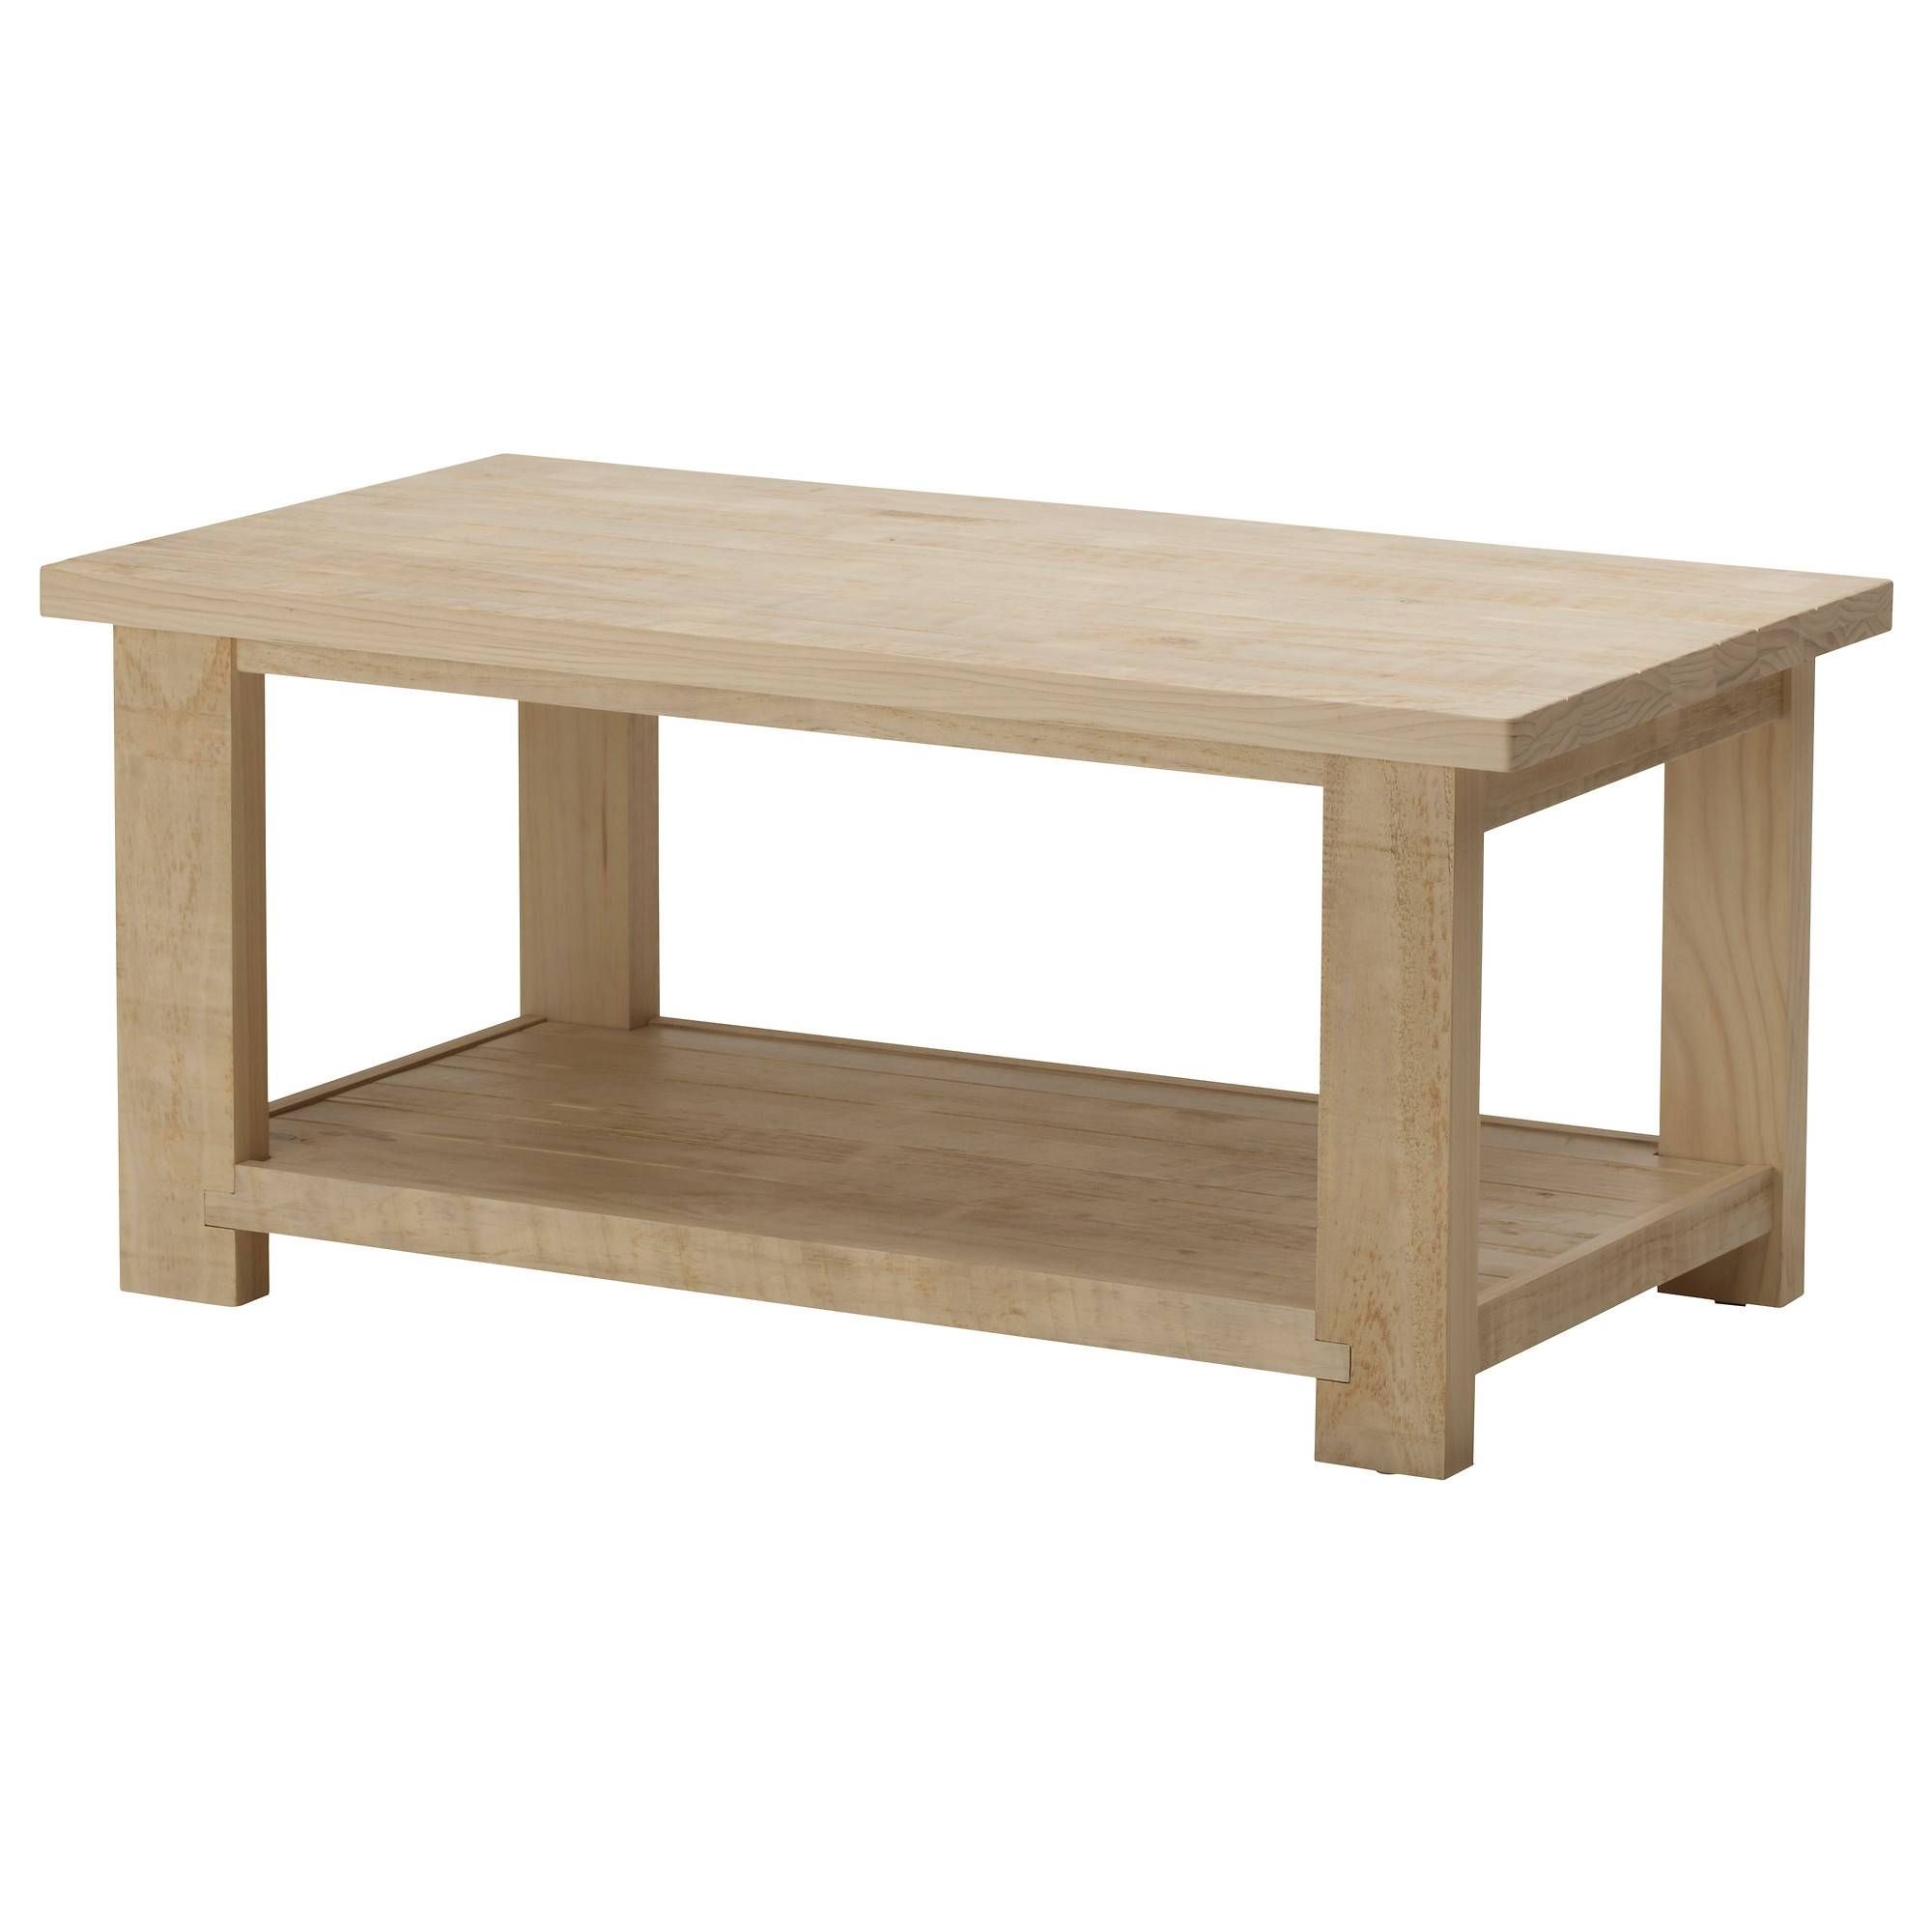 Wonderful Design Of Wooden Coffee Table – Wooden Coffee Tables Throughout Pine Coffee Tables With Storage (Photo 14 of 30)